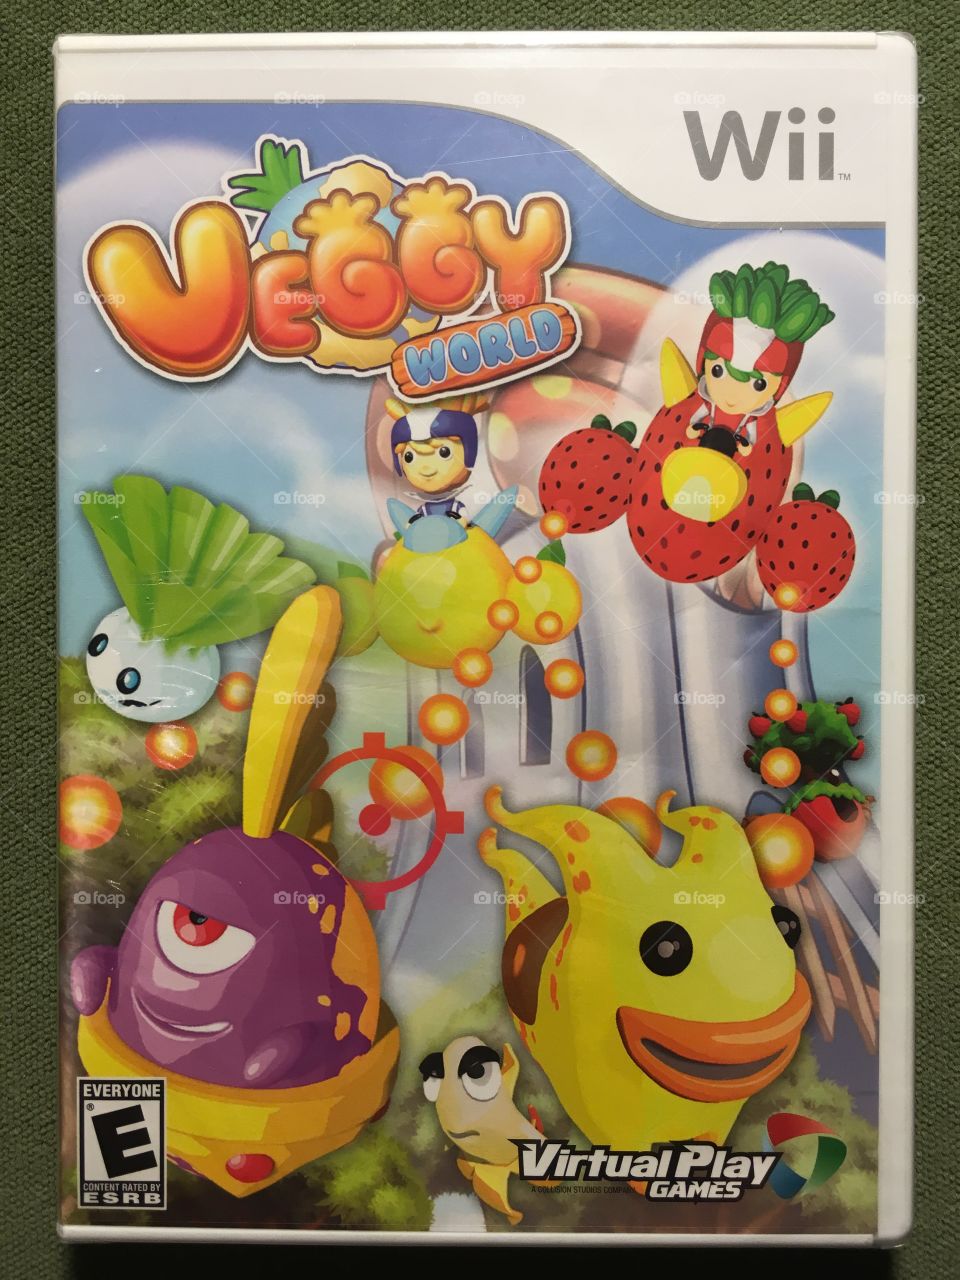 Veggy World 
Video game for Nintendo Wii
Brand New Sealed
Released - 2010